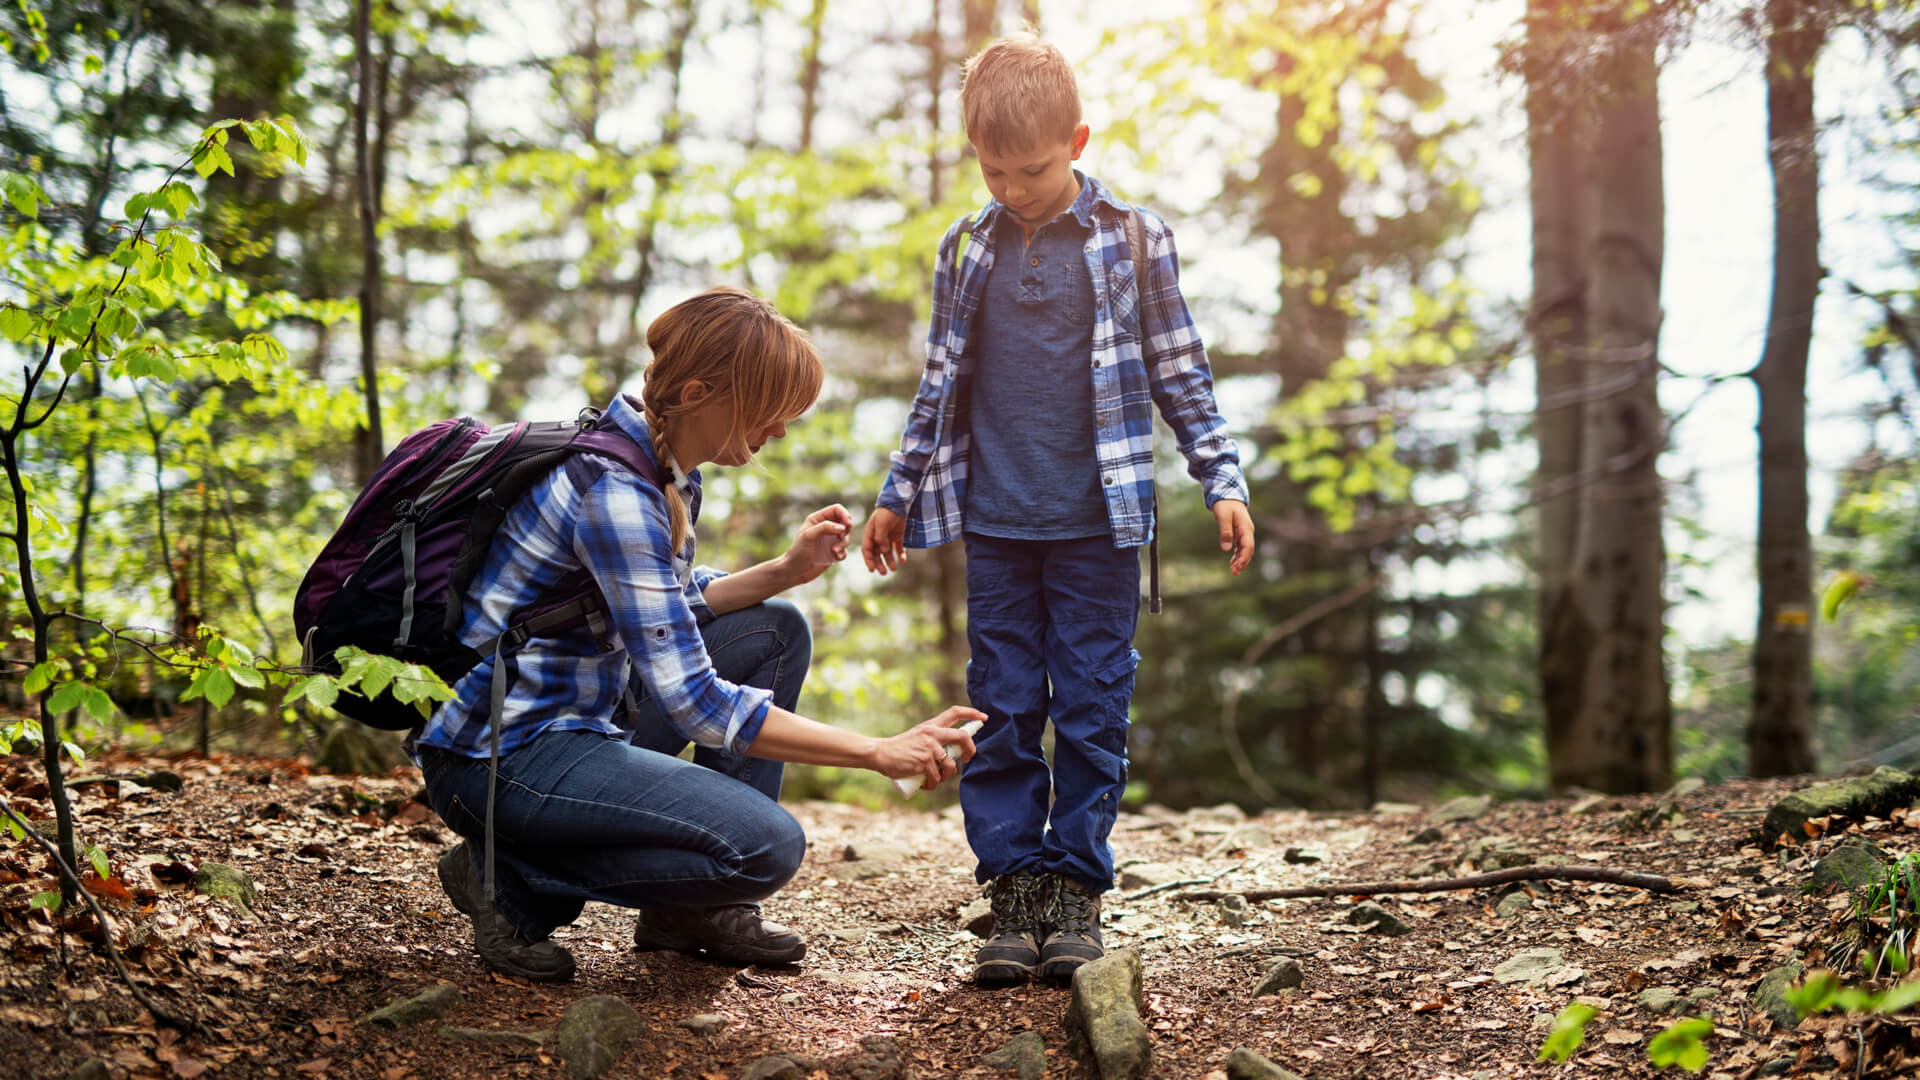 Tickborne illnesses are on the rise. Carmen Teague, MD, specialty medical director in internal medicine with Mecklenburg Medical Group - Uptown, discusses how to protect yourself and your family, while still enjoying your favorite outdoor activities. 